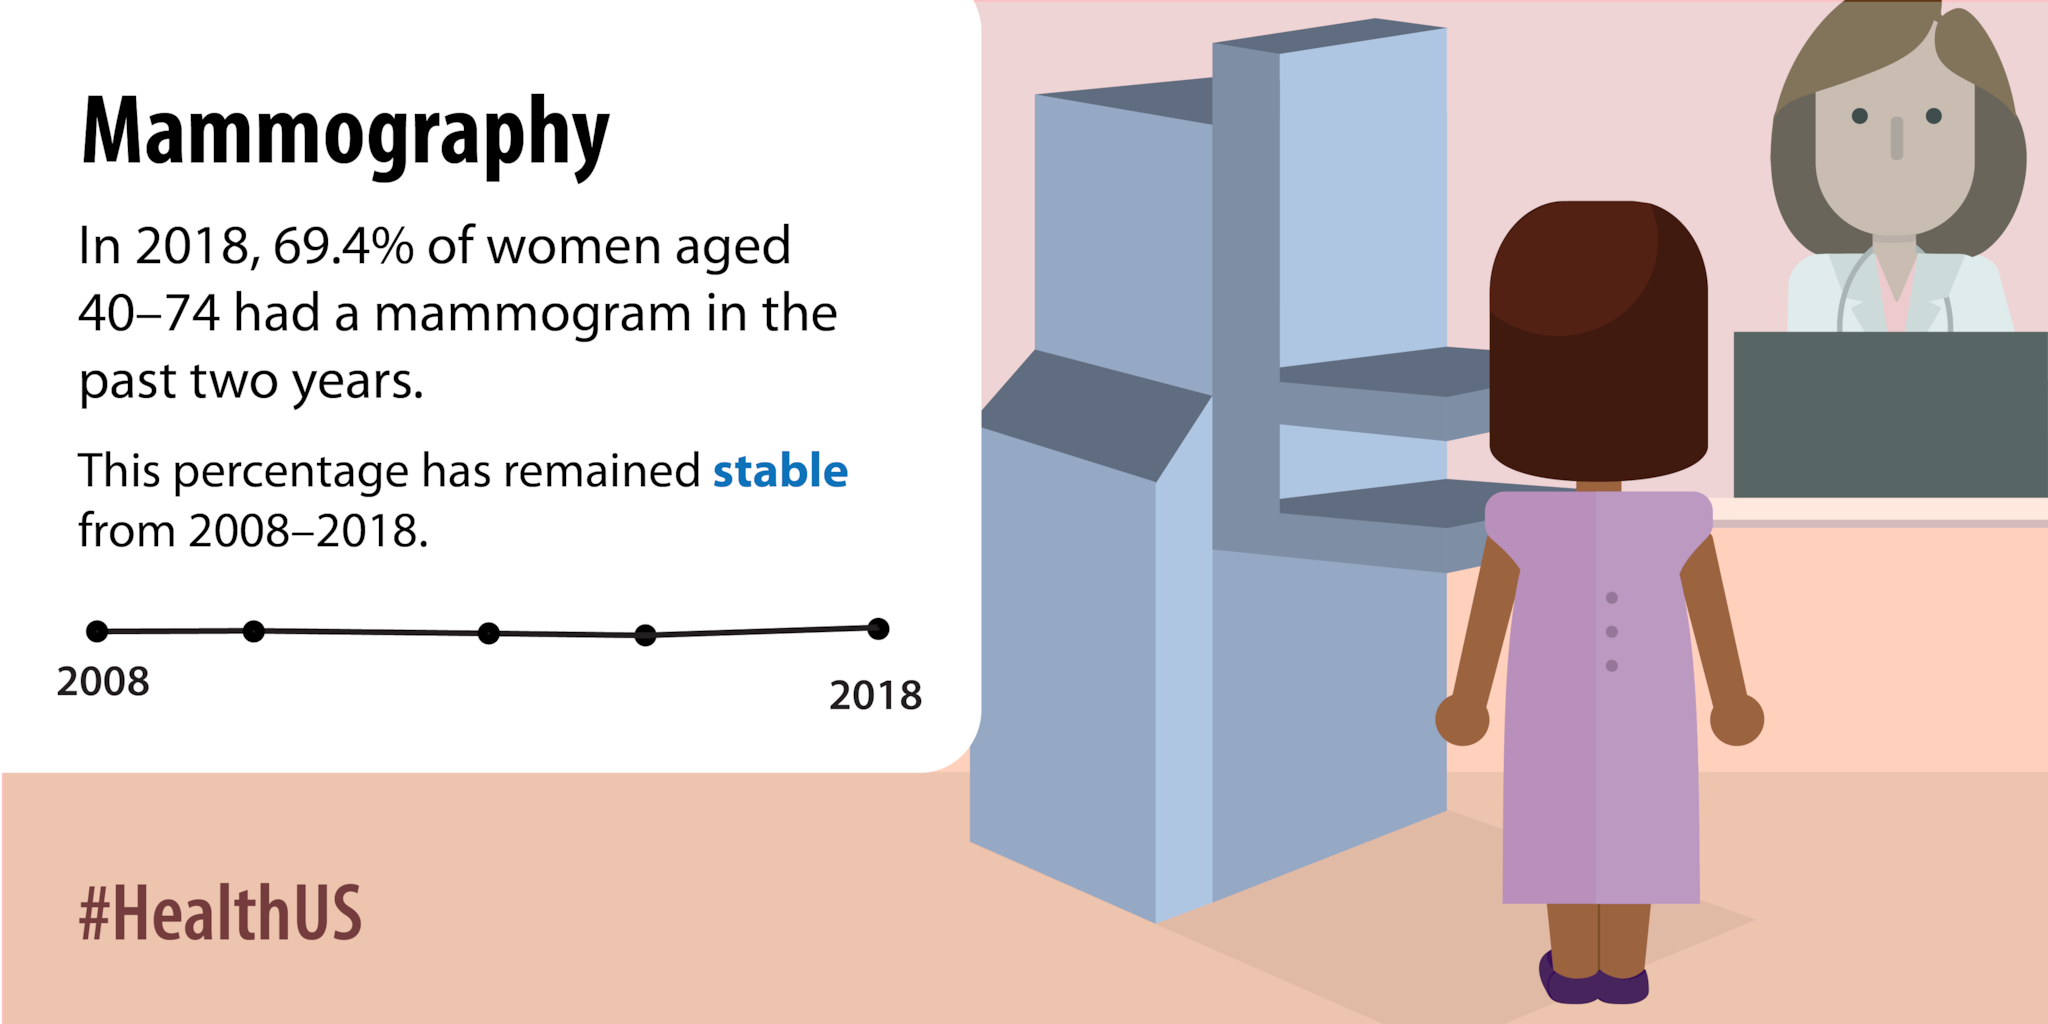 In 2018, 69.4% of women aged 40-74 had a mammogram in the past two years.